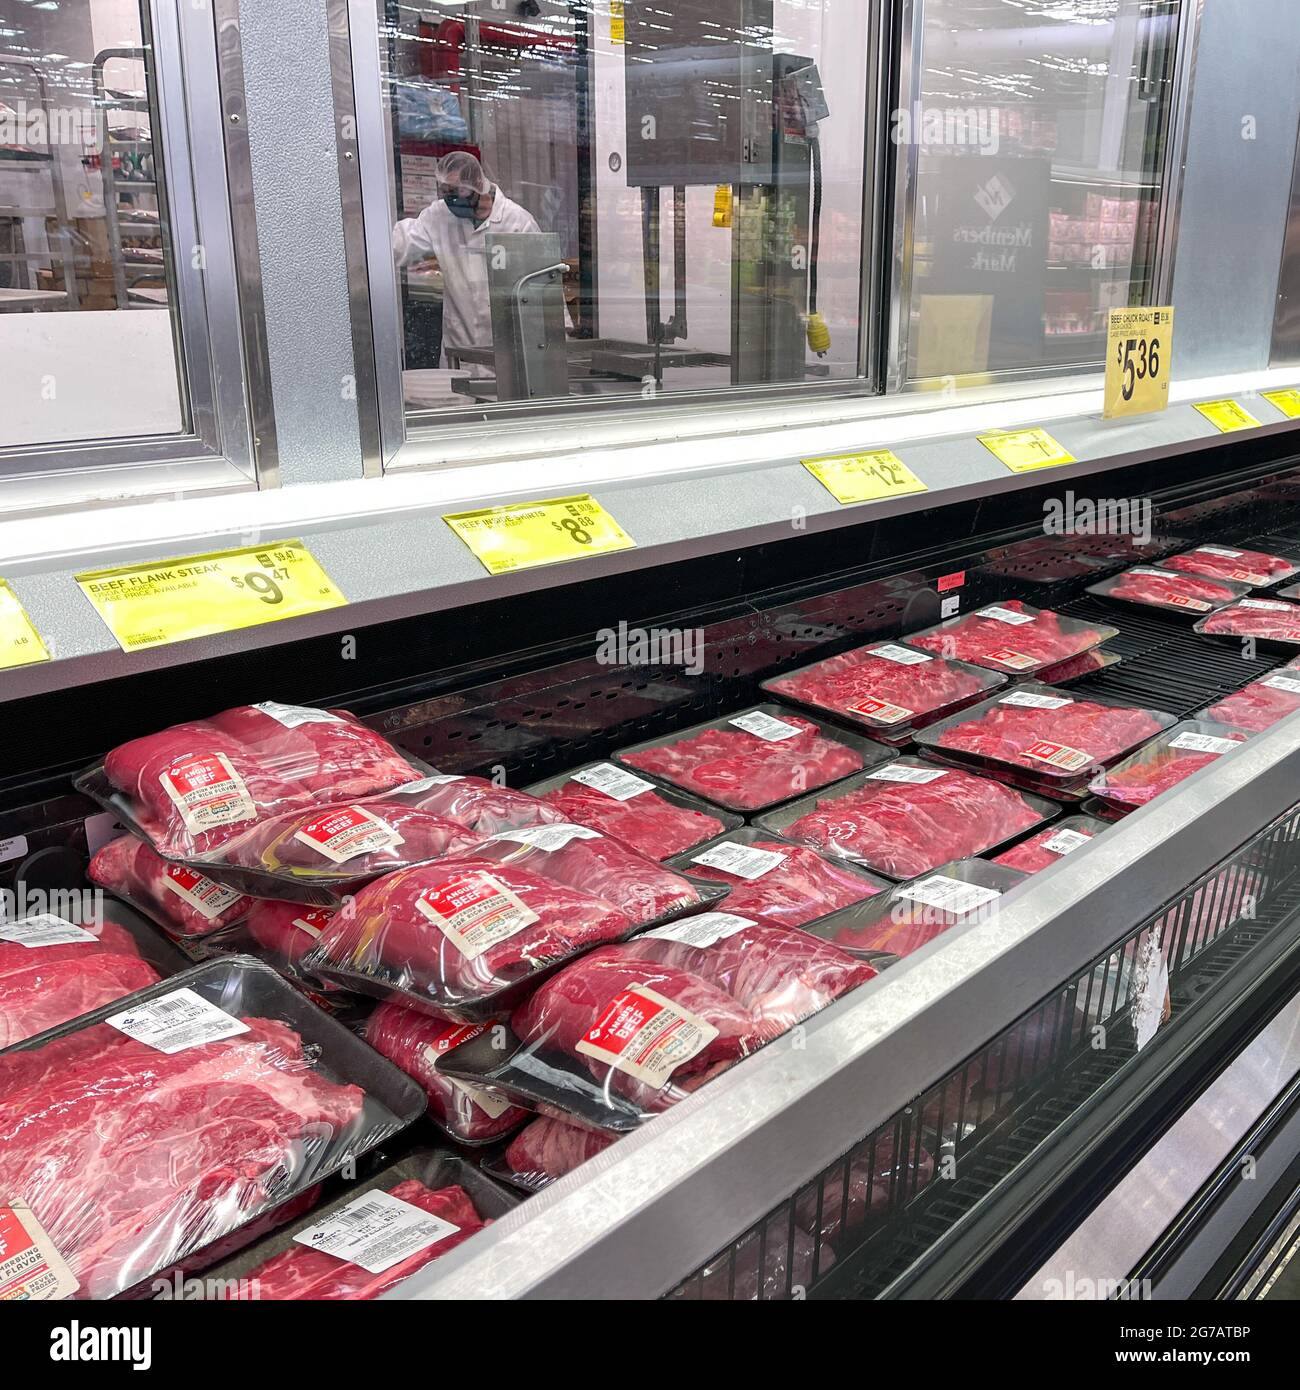 Shiloh, IL-July 10, 2021; red and neutral plastic container of roast beef lunch  meat branded Hillshire Farm sits on shelf display in refrigerator sect  Stock Photo - Alamy